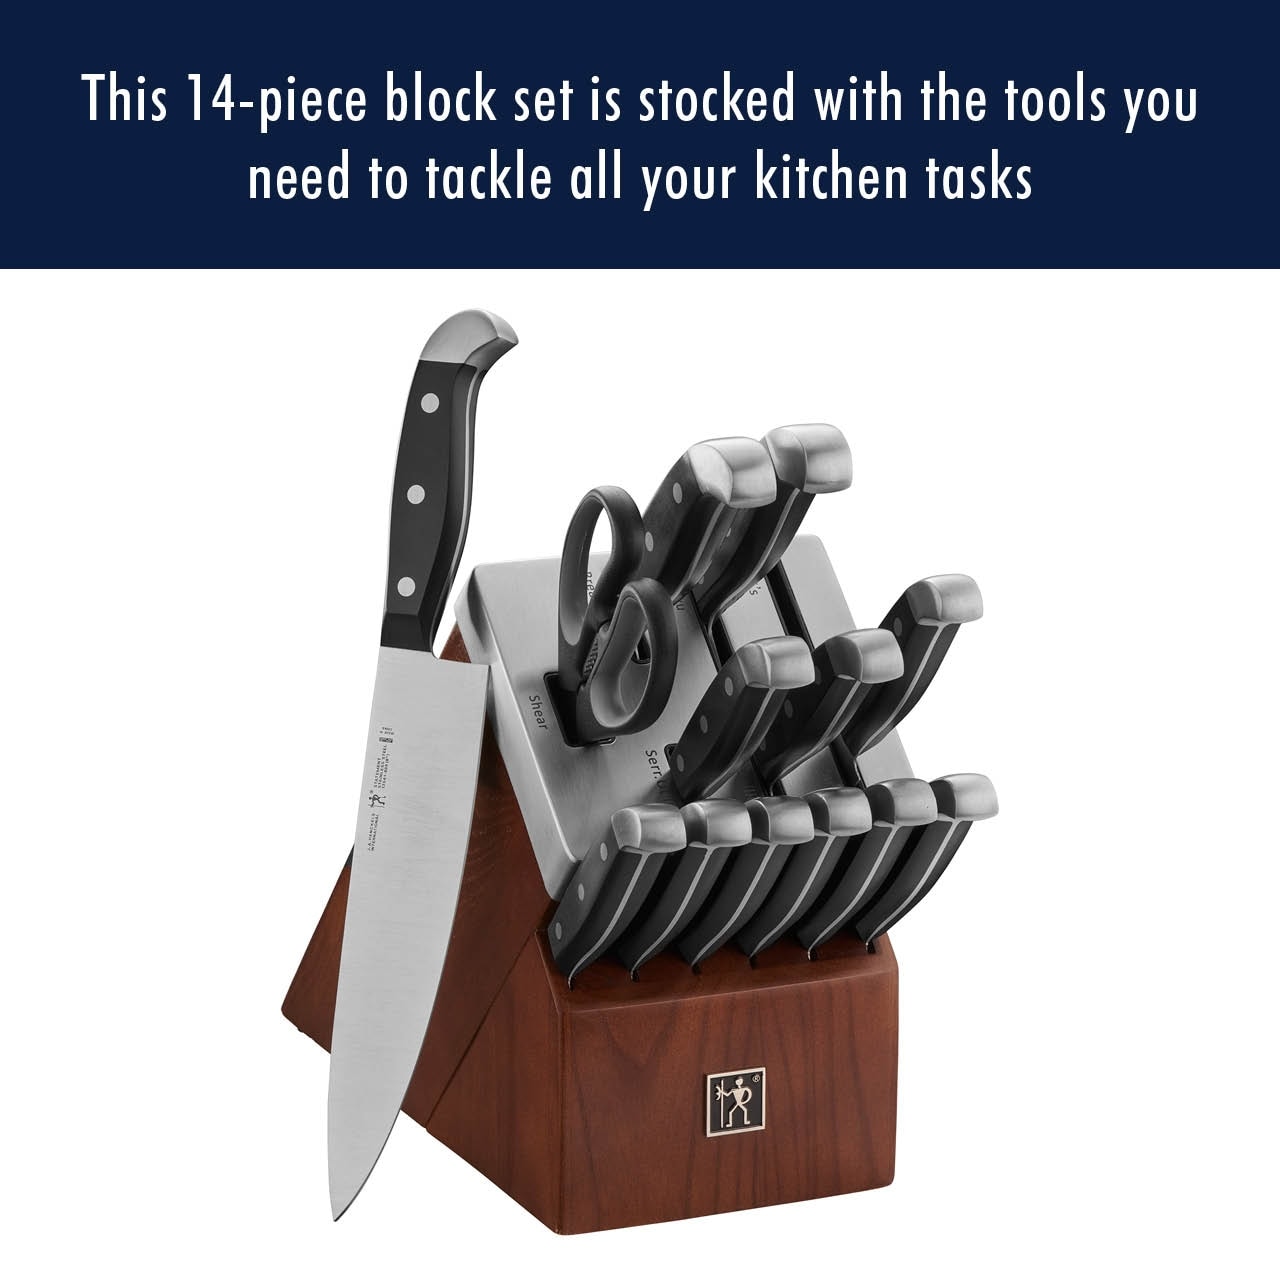 https://ak1.ostkcdn.com/images/products/is/images/direct/7afd168cdbe5cadf177d86e7915b9d78e8bc6788/HENCKELS-Statement-Self-Sharpening-Knife-Set-with-Block%2C-Chef-Knife%2C-Paring-Knife%2C-Bread-Knife%2C-Steak-Knife%2C-14-piece.jpg